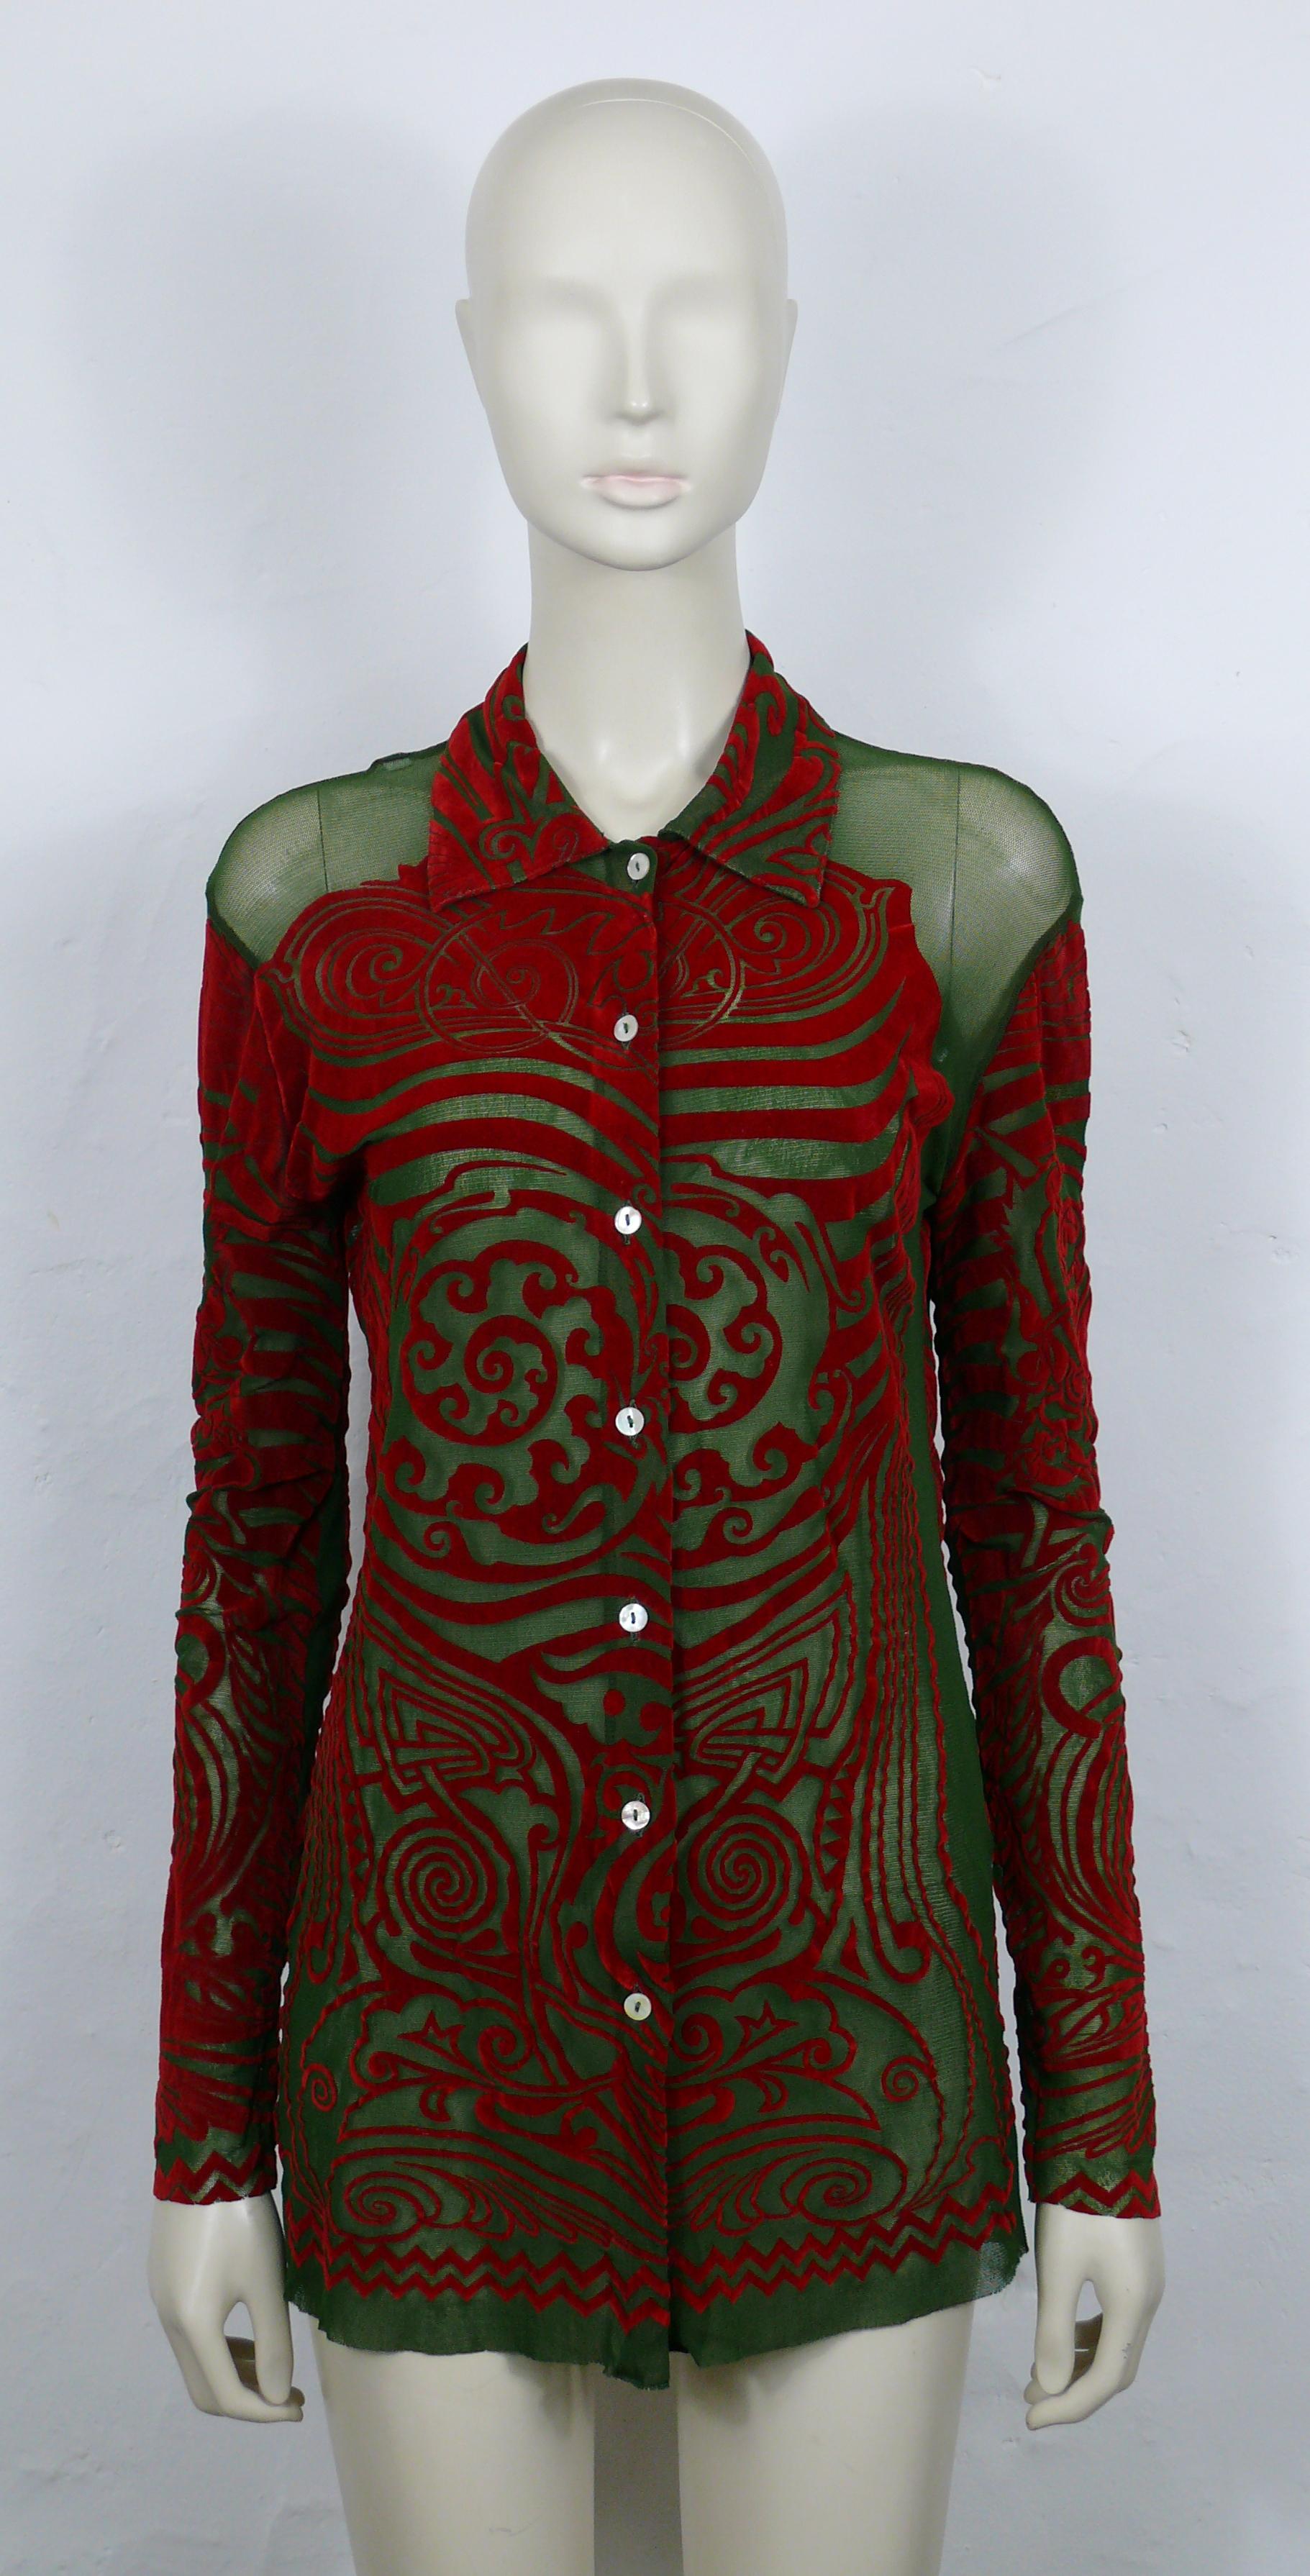 Black JEAN PAUL GAULTIER Vintage 1996 Iconic Green/Red Tribal Tattoo Mesh Shirt Size L For Sale